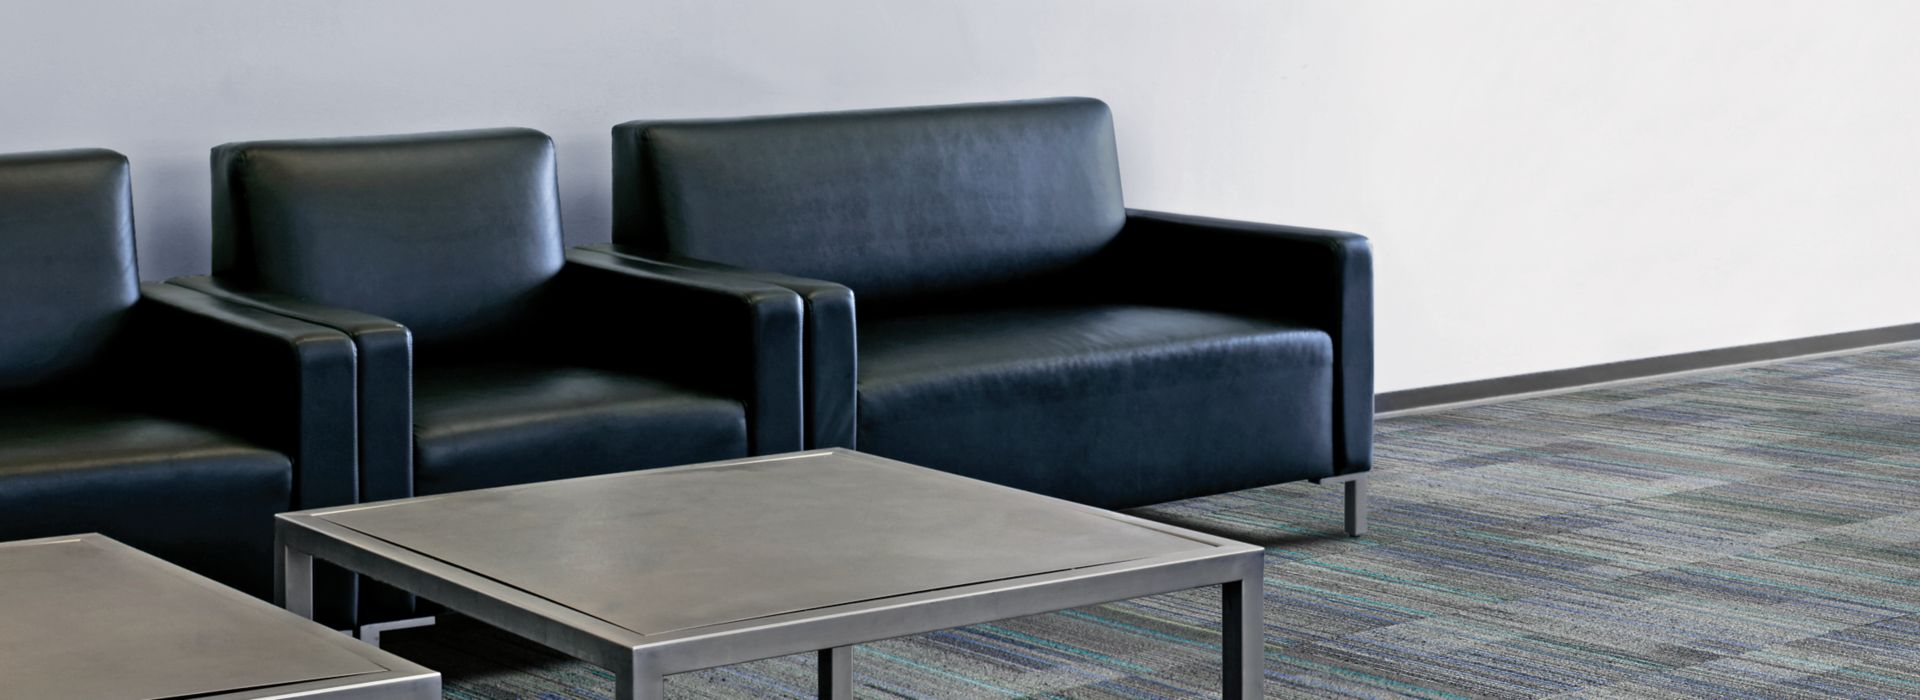 Interface Straight Edge carpet tile in waiting area with table and chairs